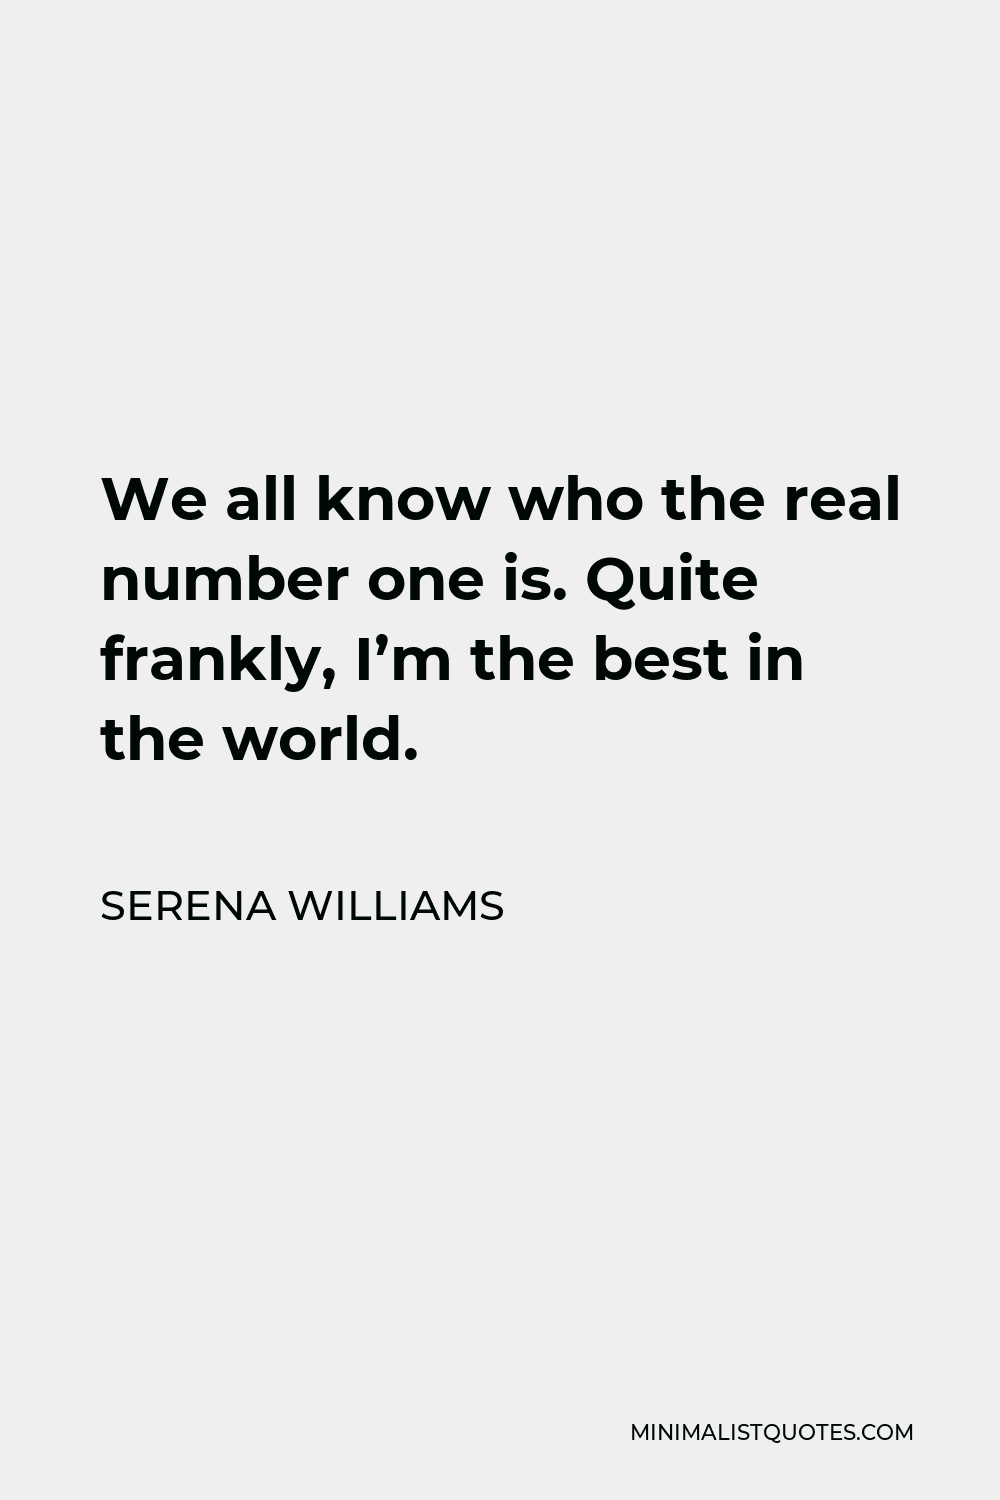 Serena Williams Quote - We all know who the real number one is. Quite frankly, I’m the best in the world.